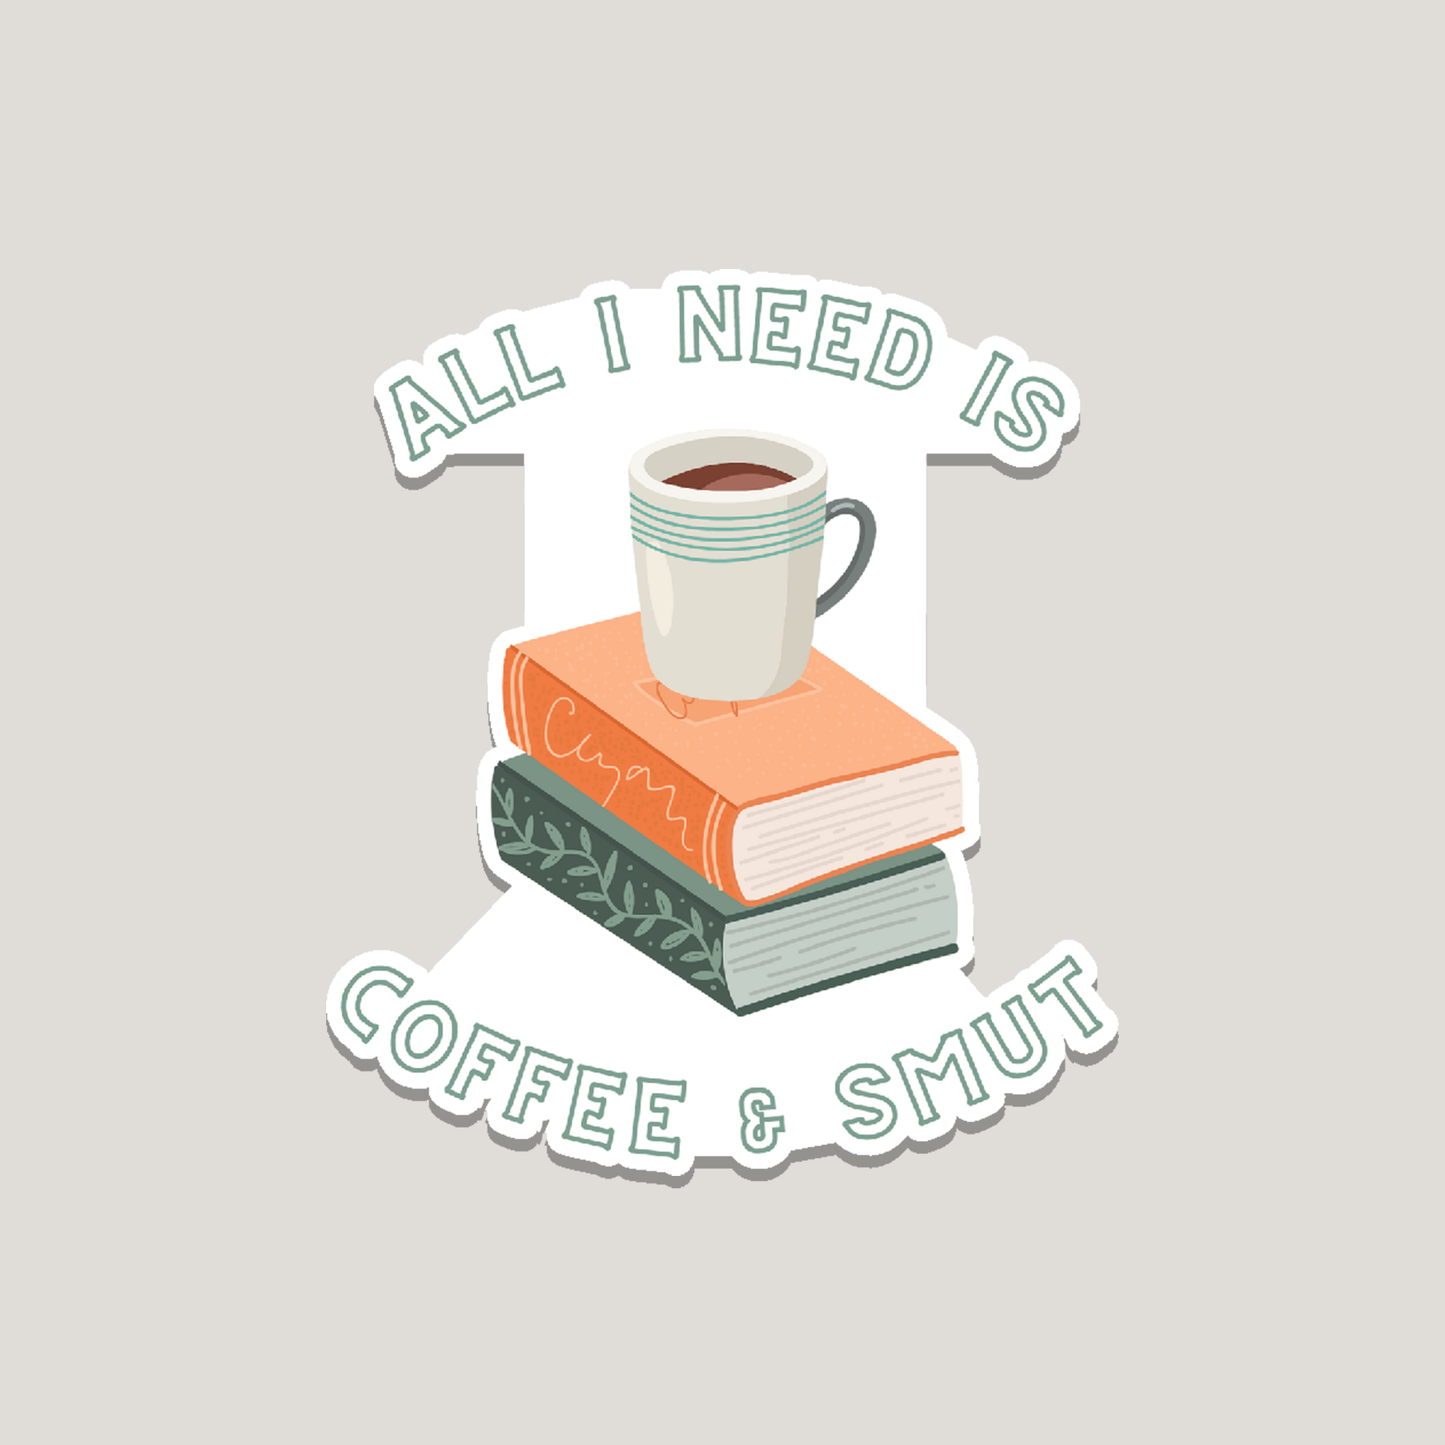 all I need is coffee & smut sticker